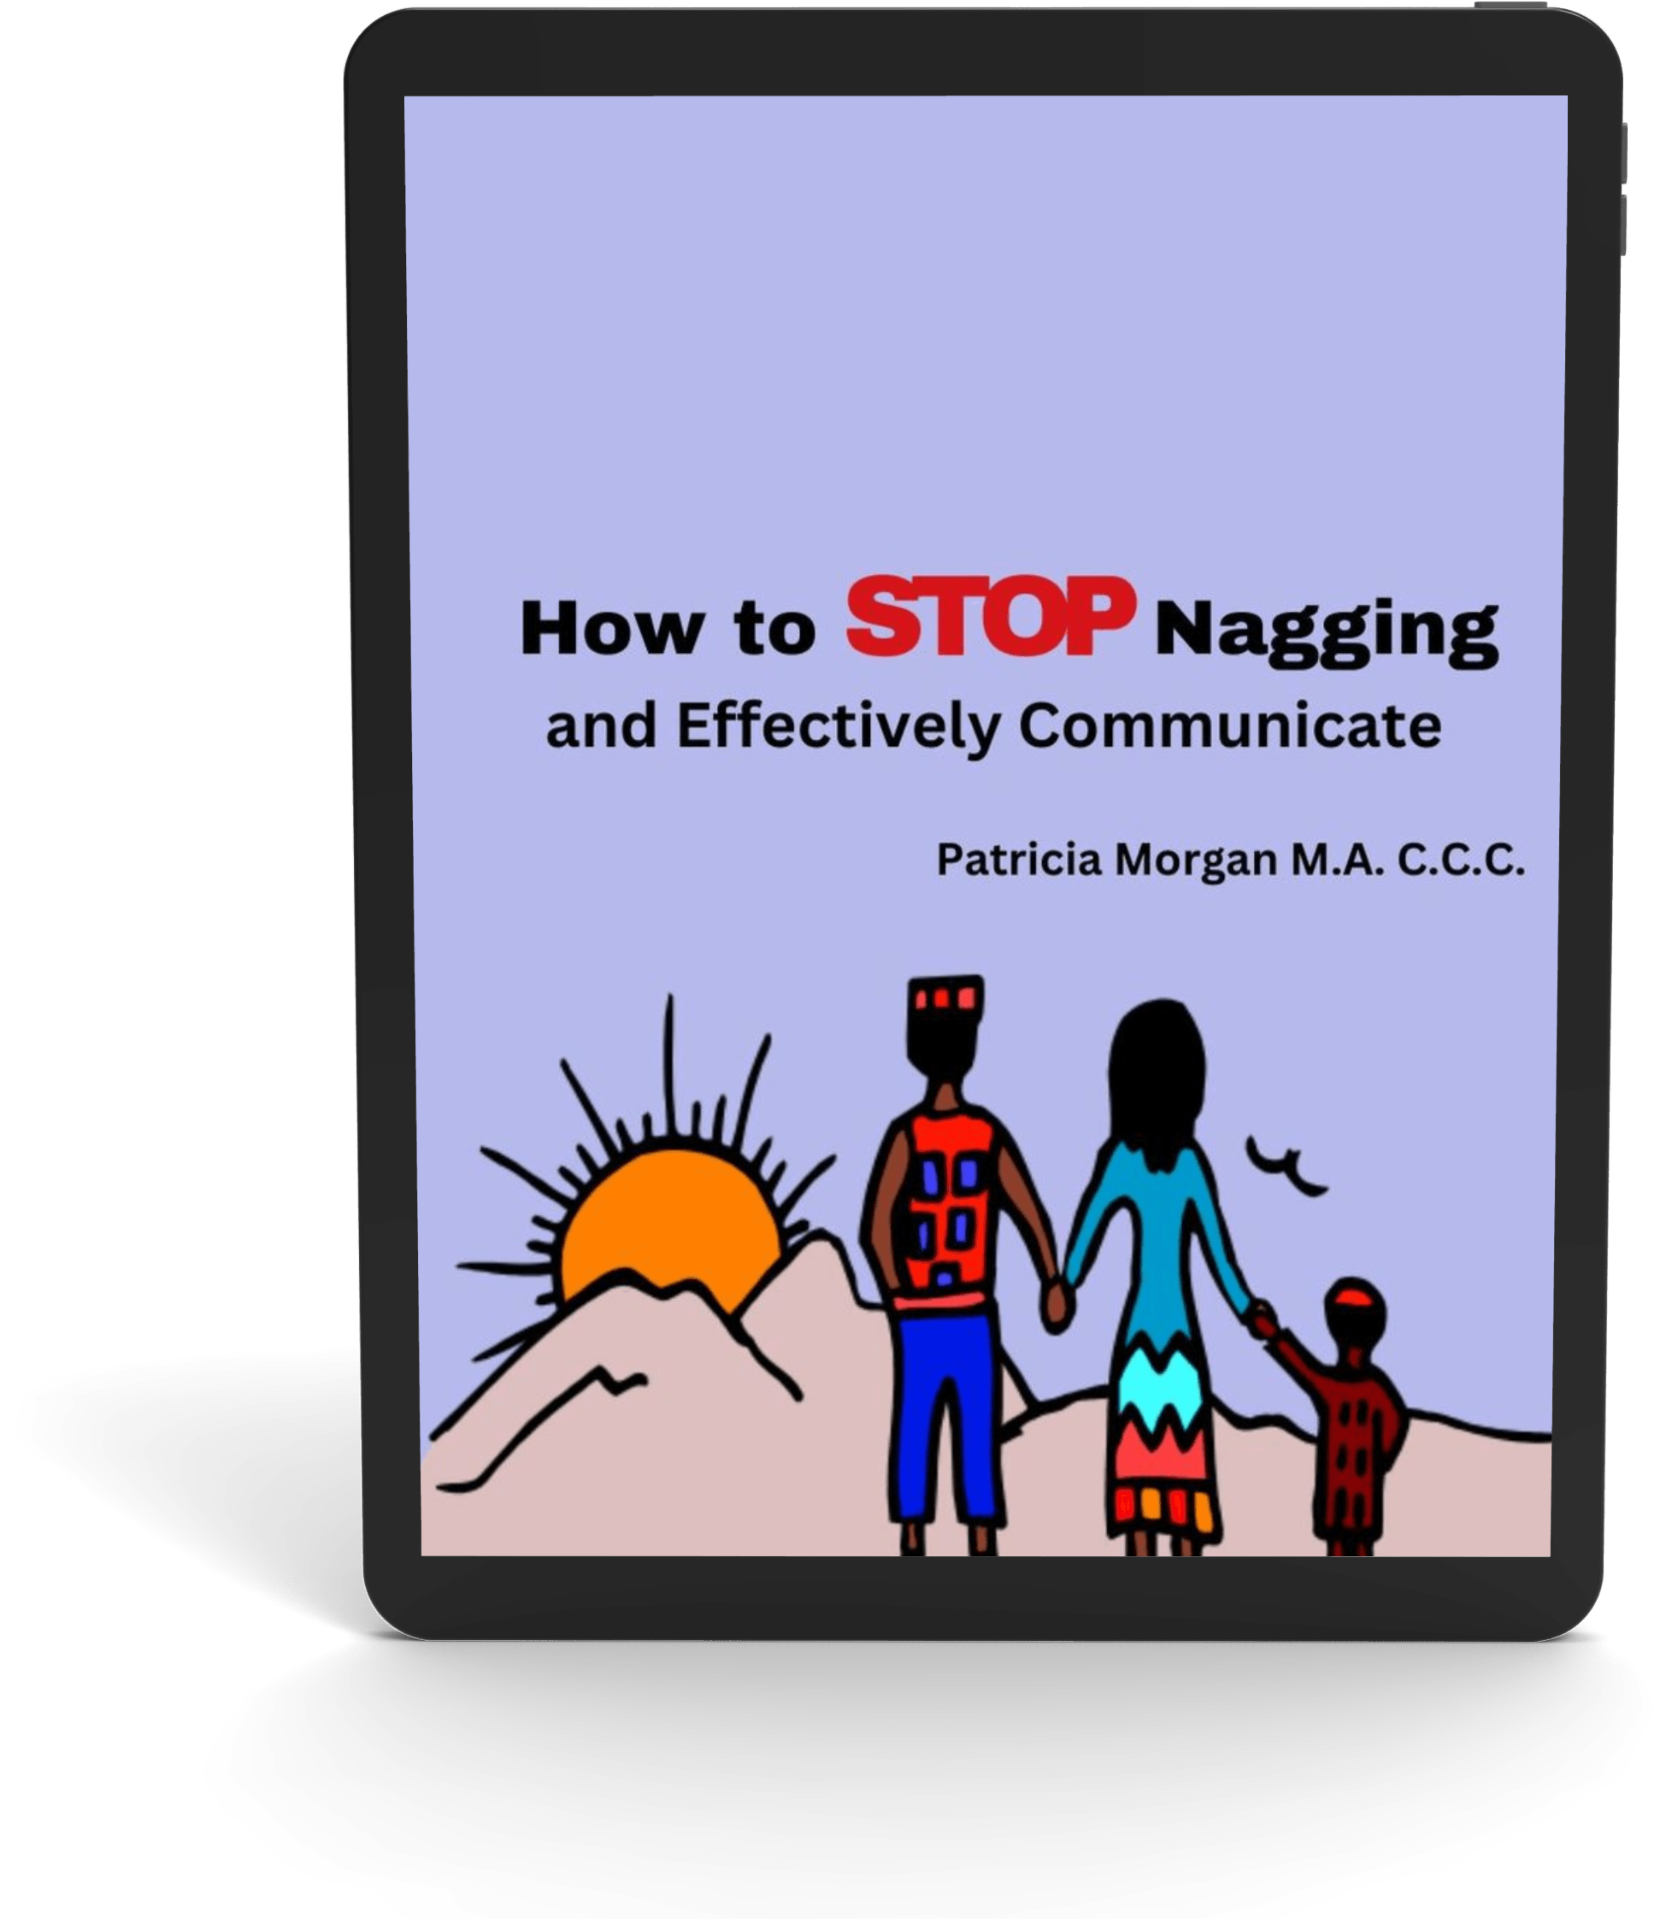 How to Stop Nagging and Effectively Communicate (ebook)